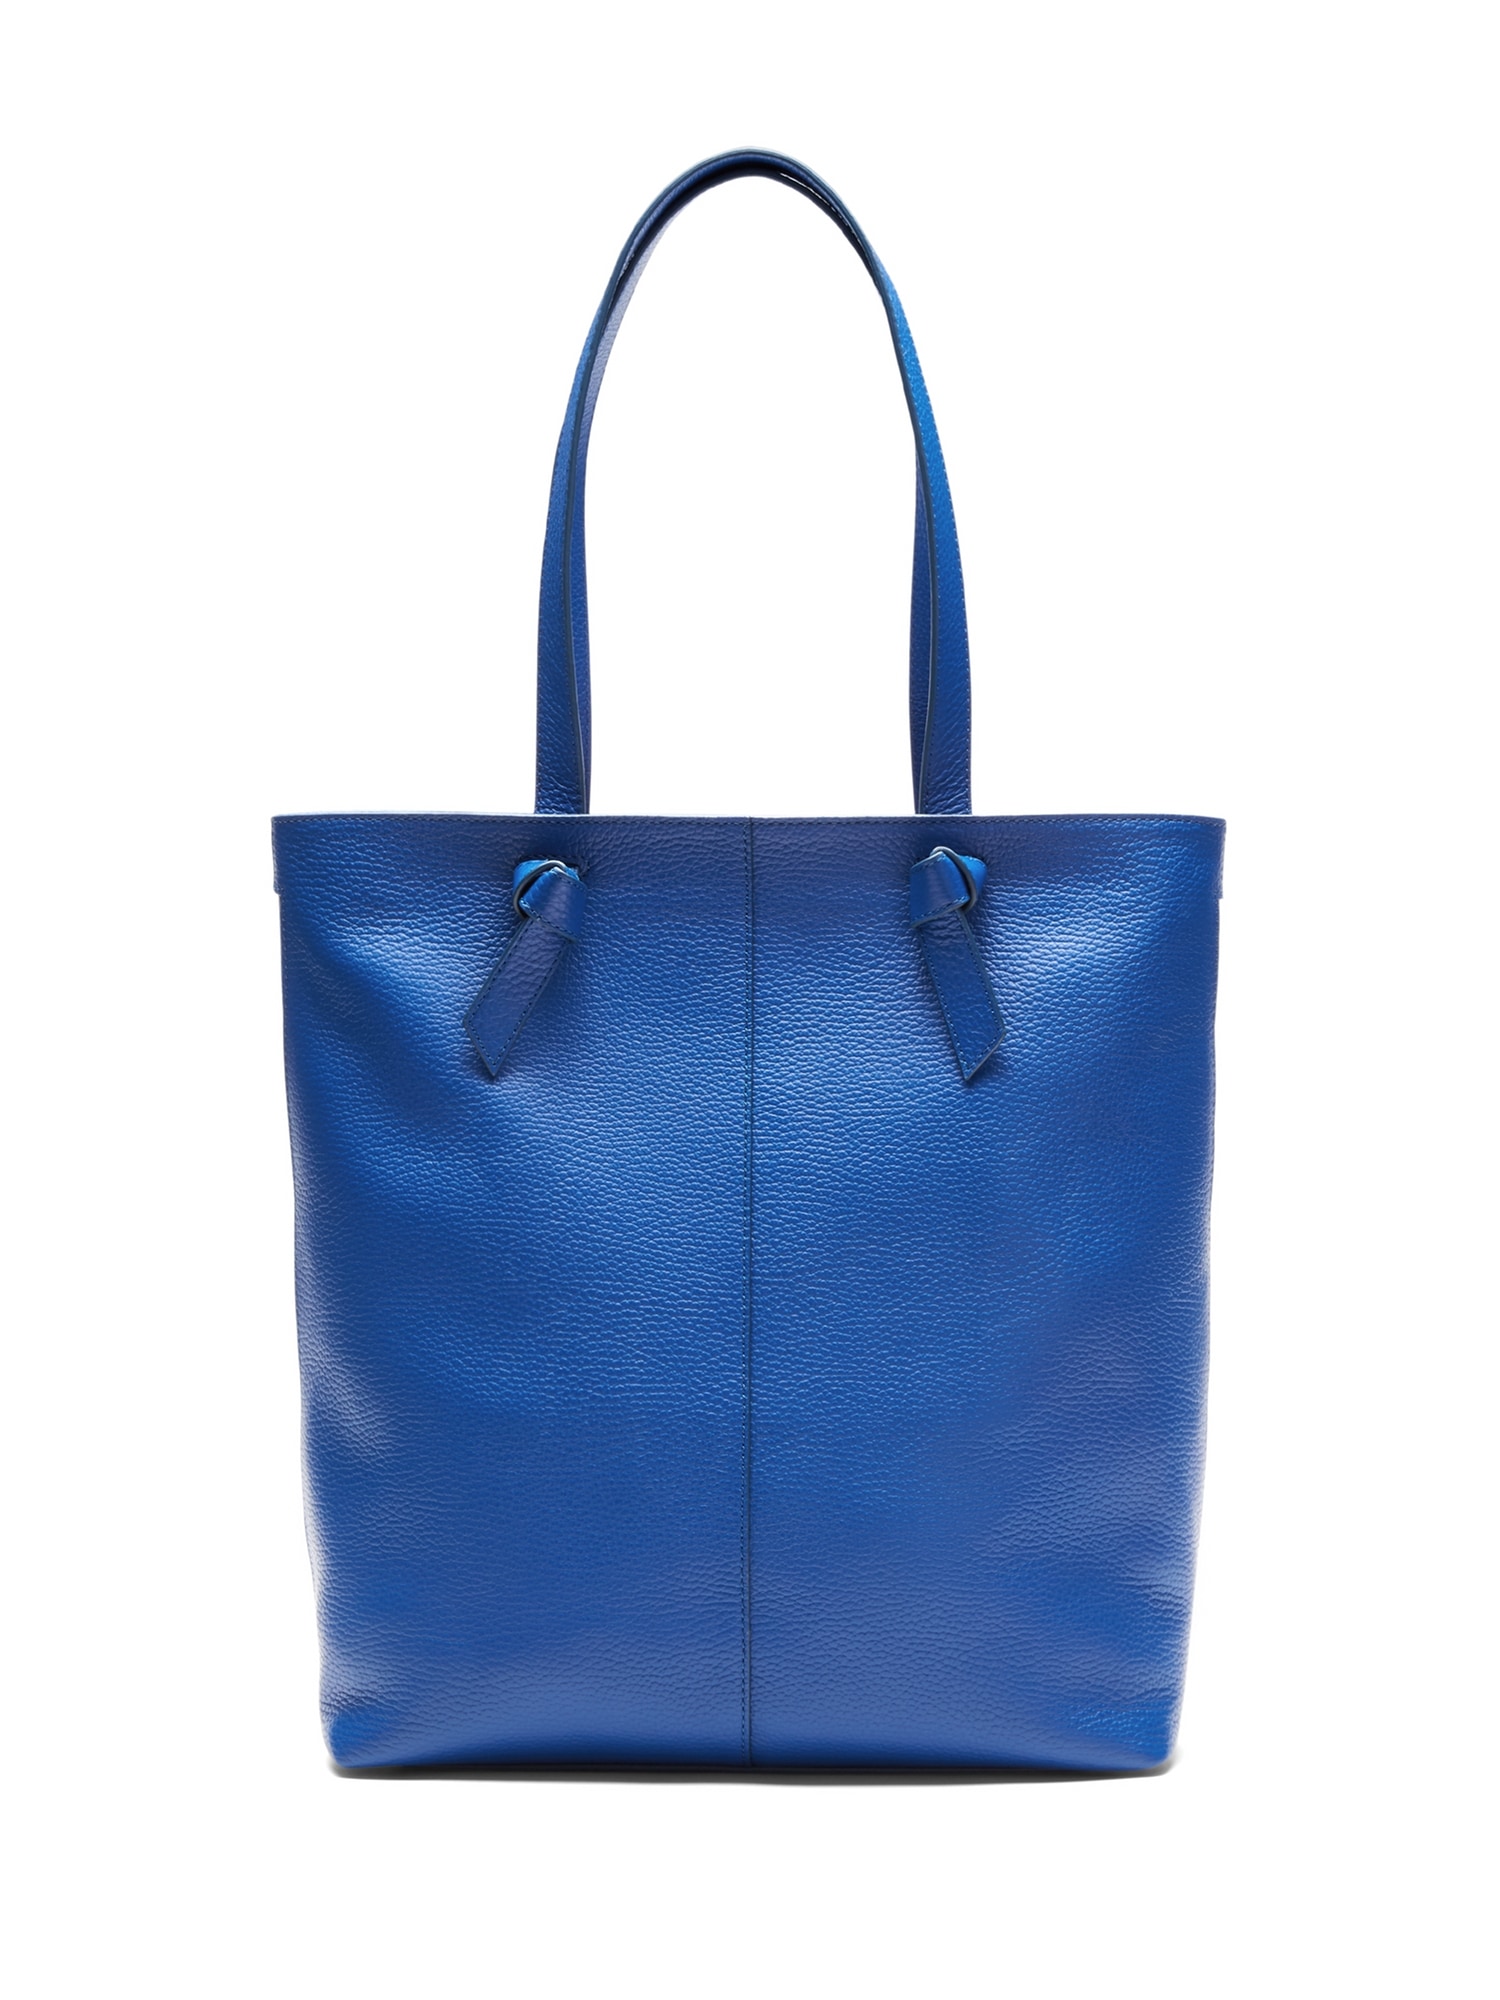 Portfolio Knotted Phone-Charging Italian Leather Tote